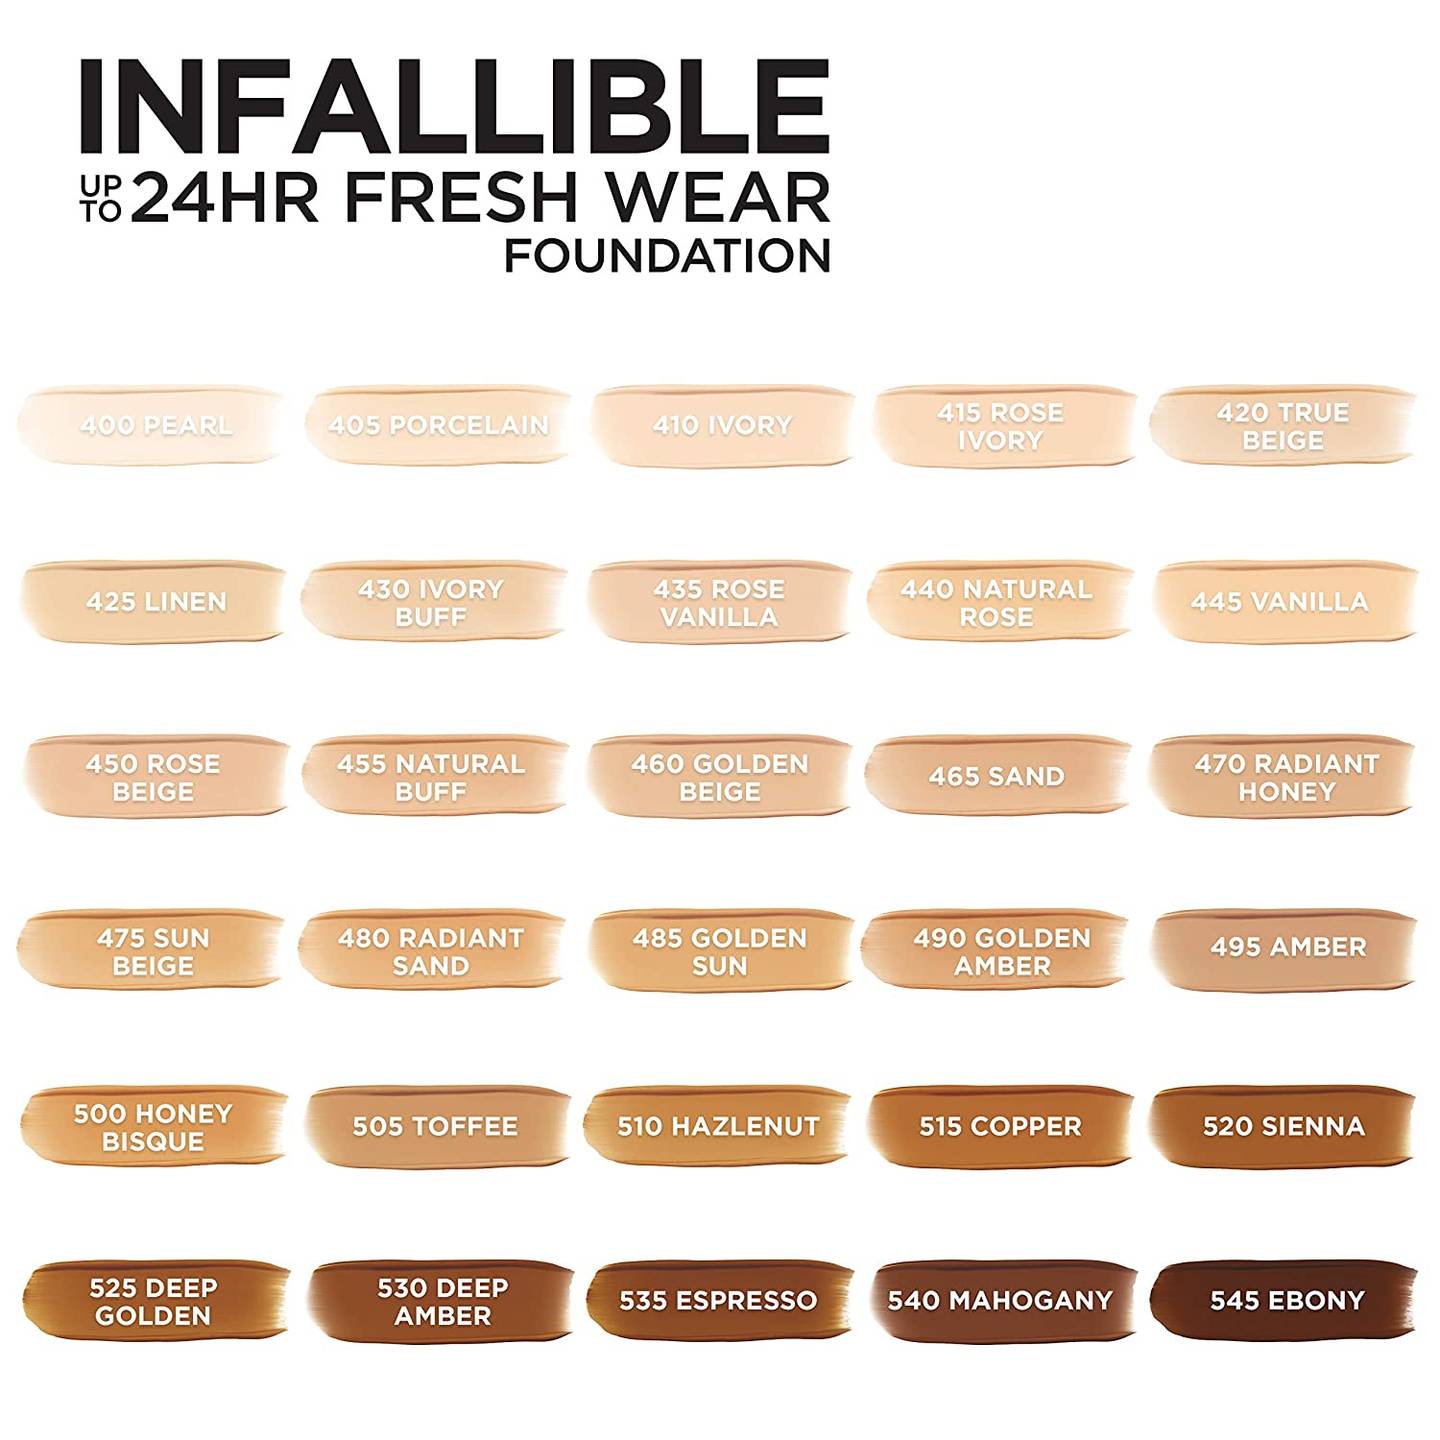 L'OREAL INFALLIBLE FOUNDATION